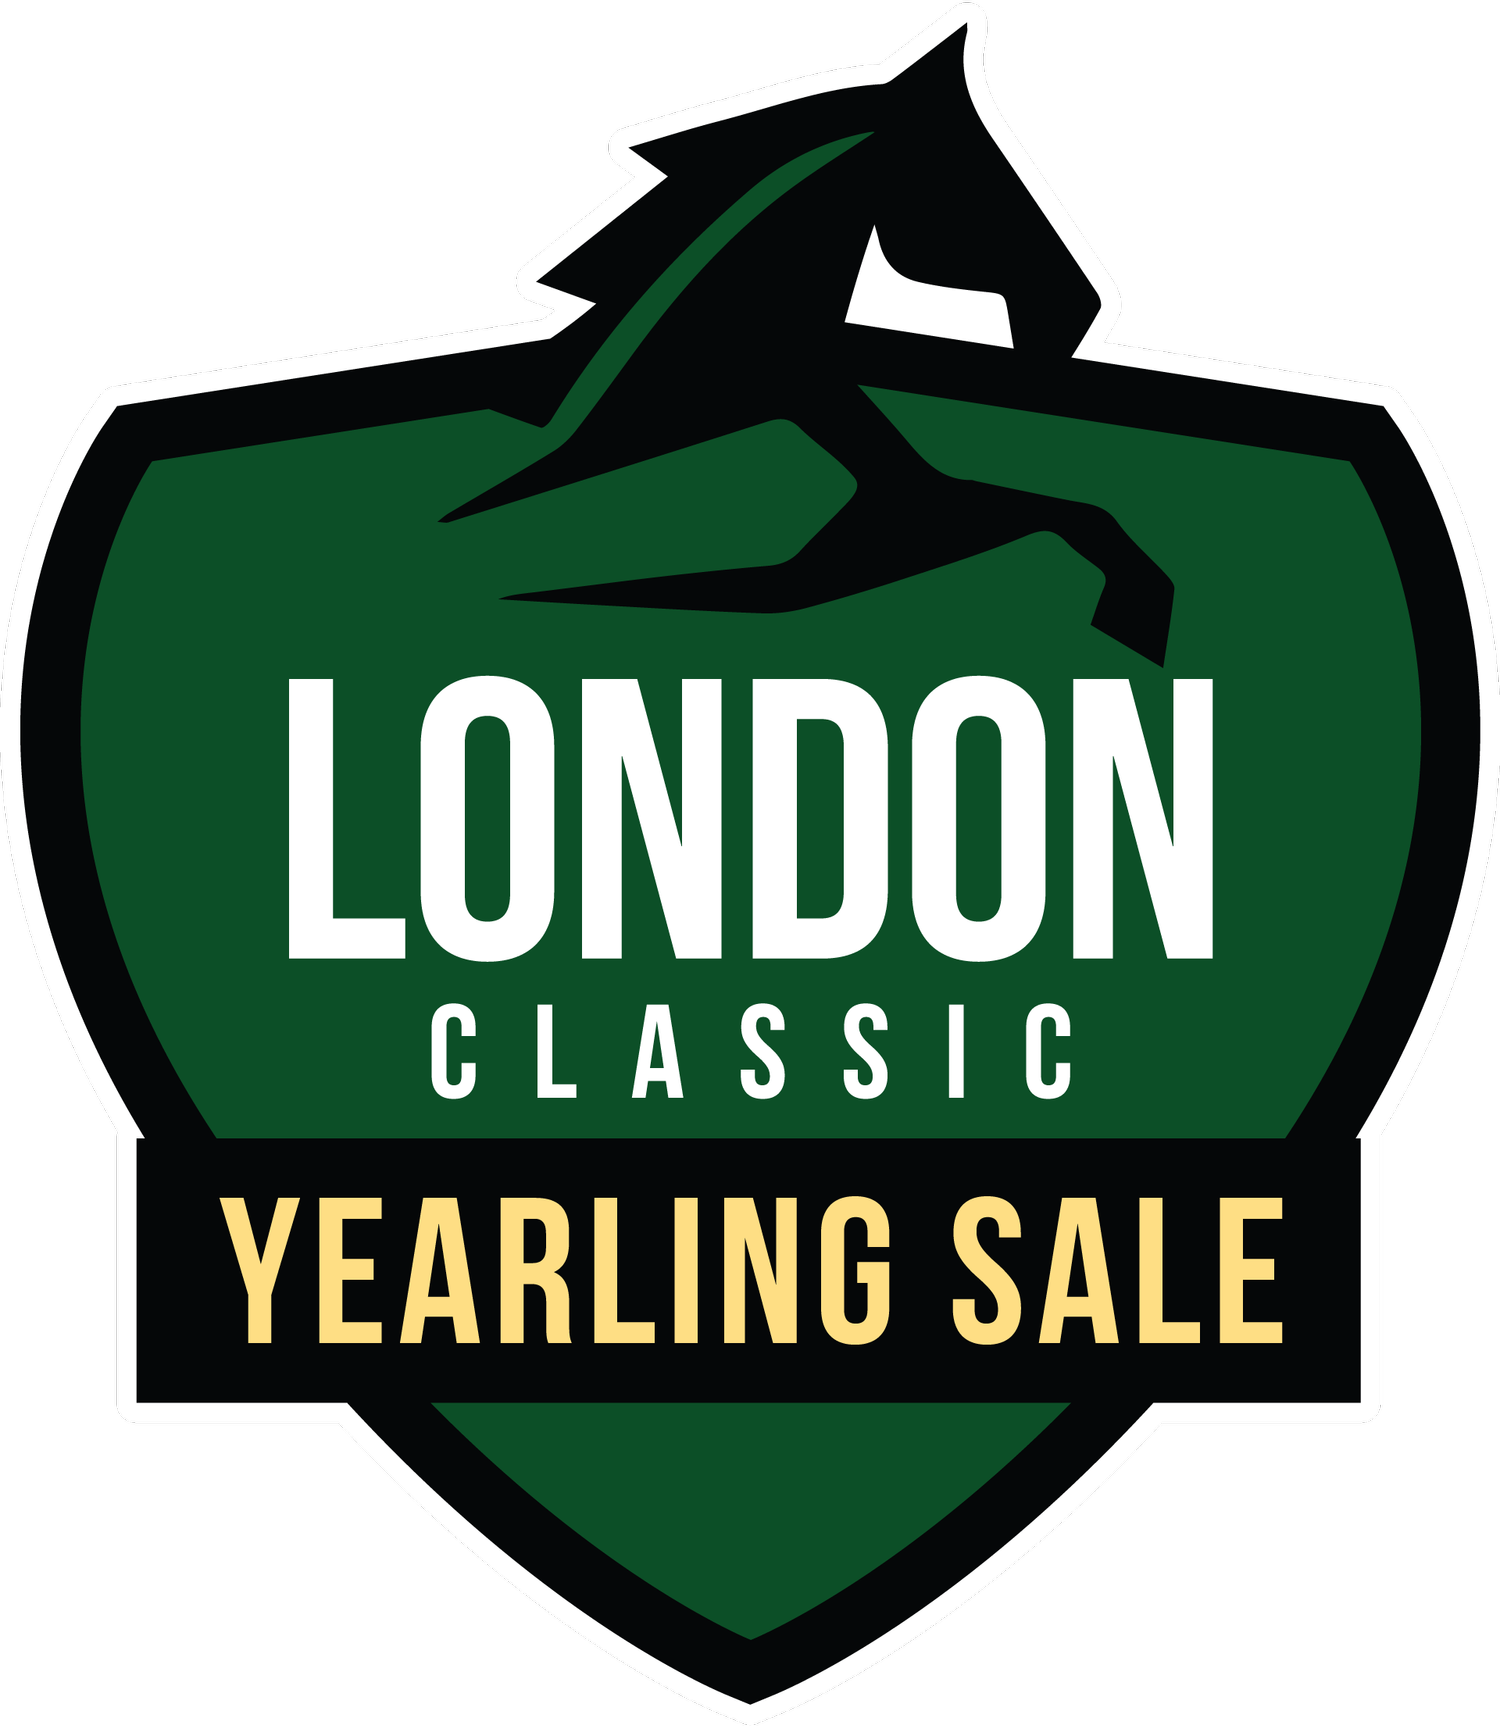 London Classic Yearling Sale